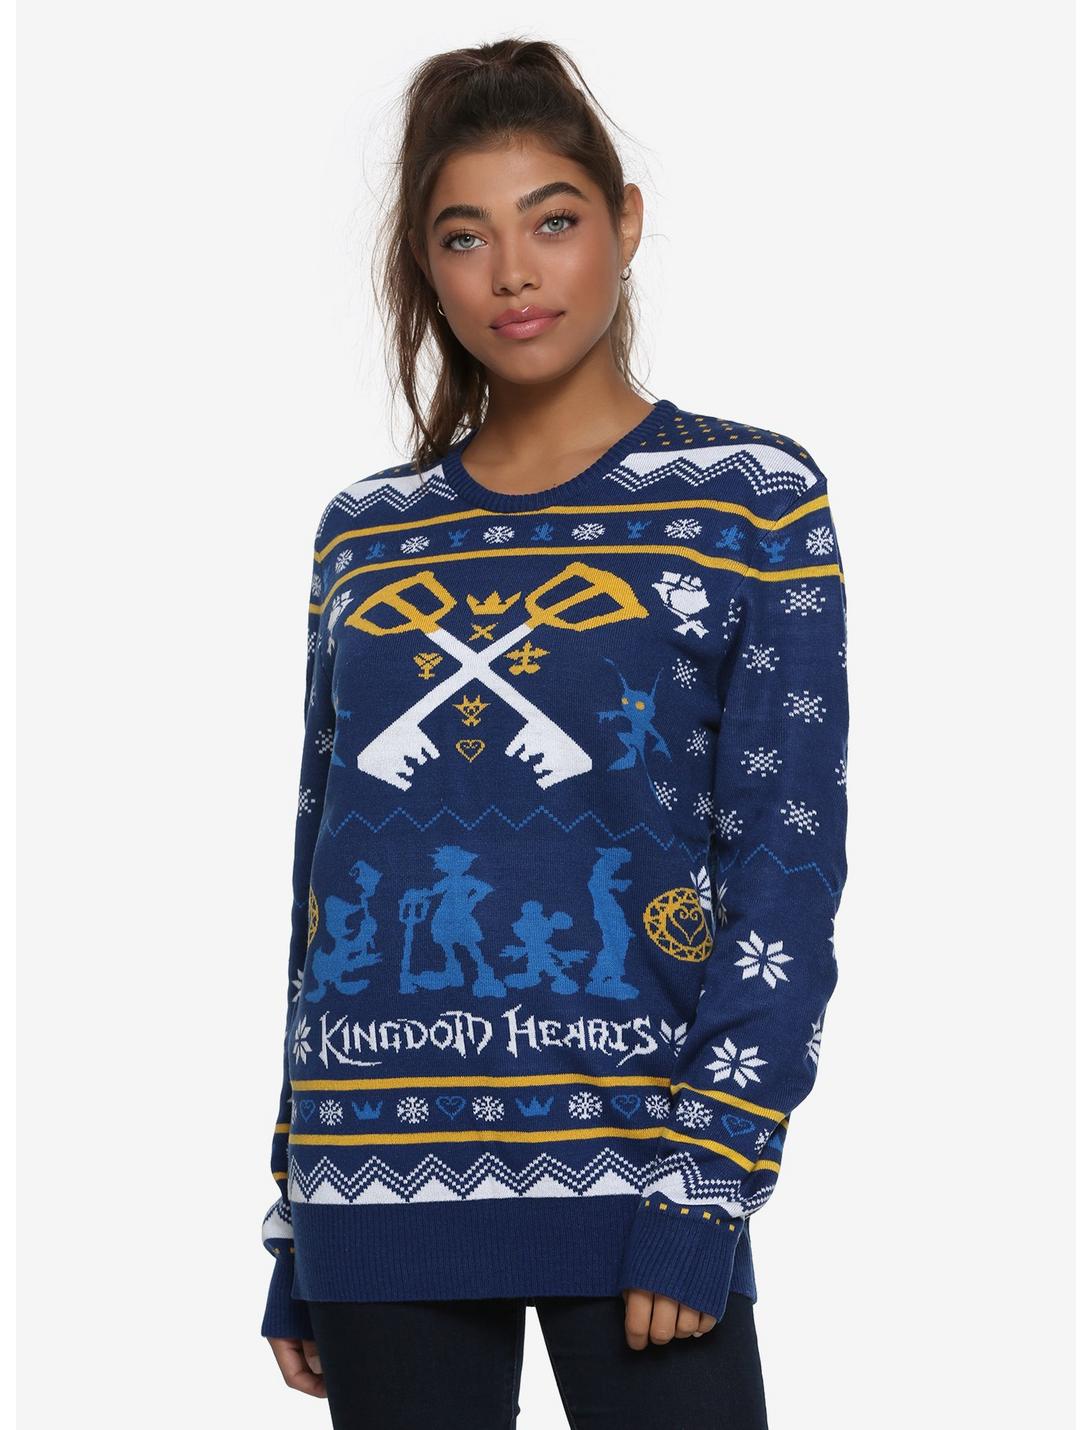 Disney Kingdom Hearts Holiday Sweater - BoxLunch Exclusive, BLUE, hi-res